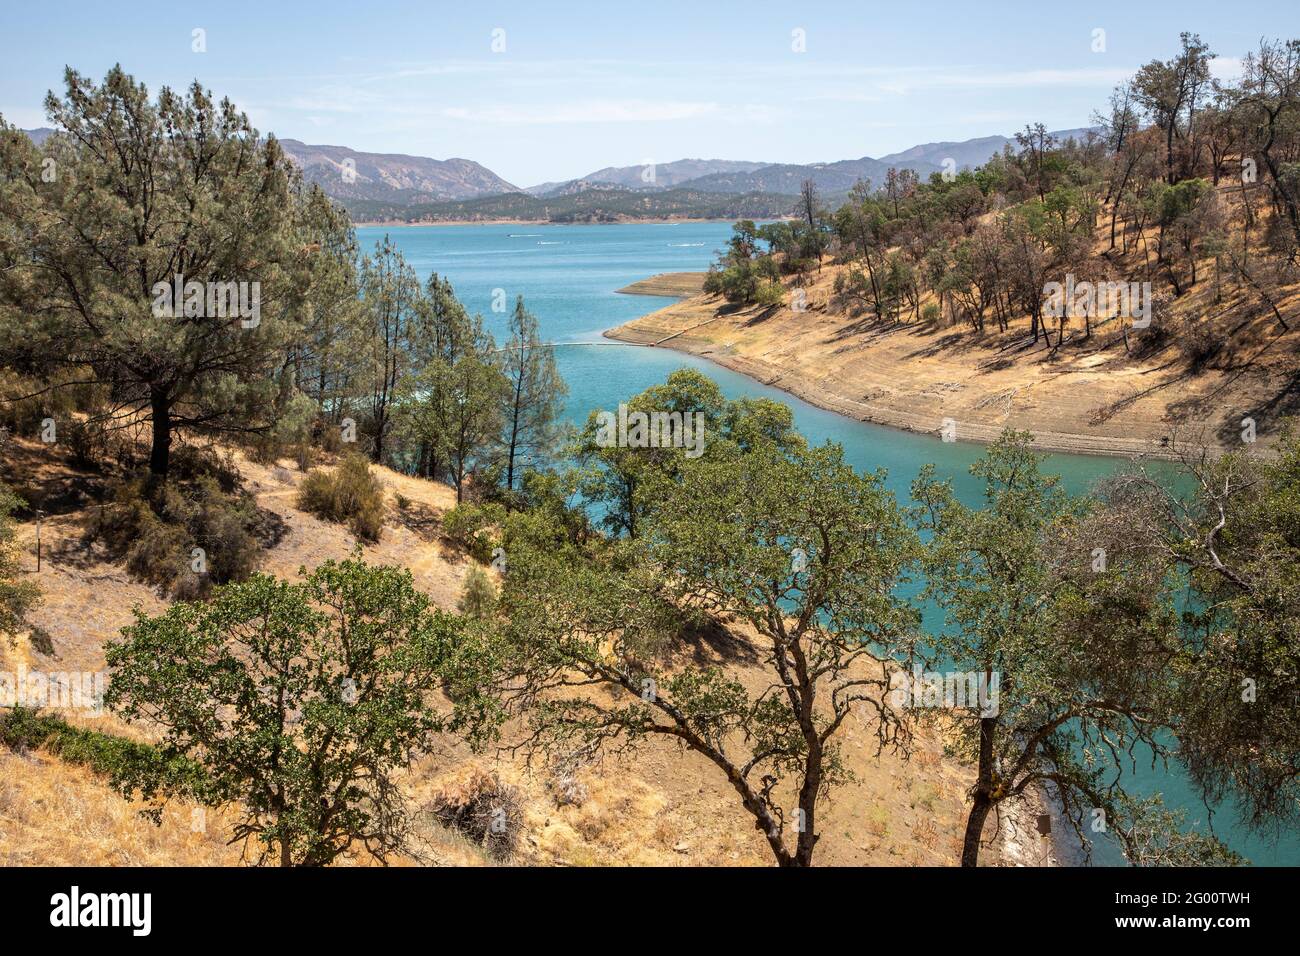 Lake Berryessa is the largest lake in Napa County in Northern California, USA. It is a recreational lake and reservoir covering about 20,000 acres. Stock Photo